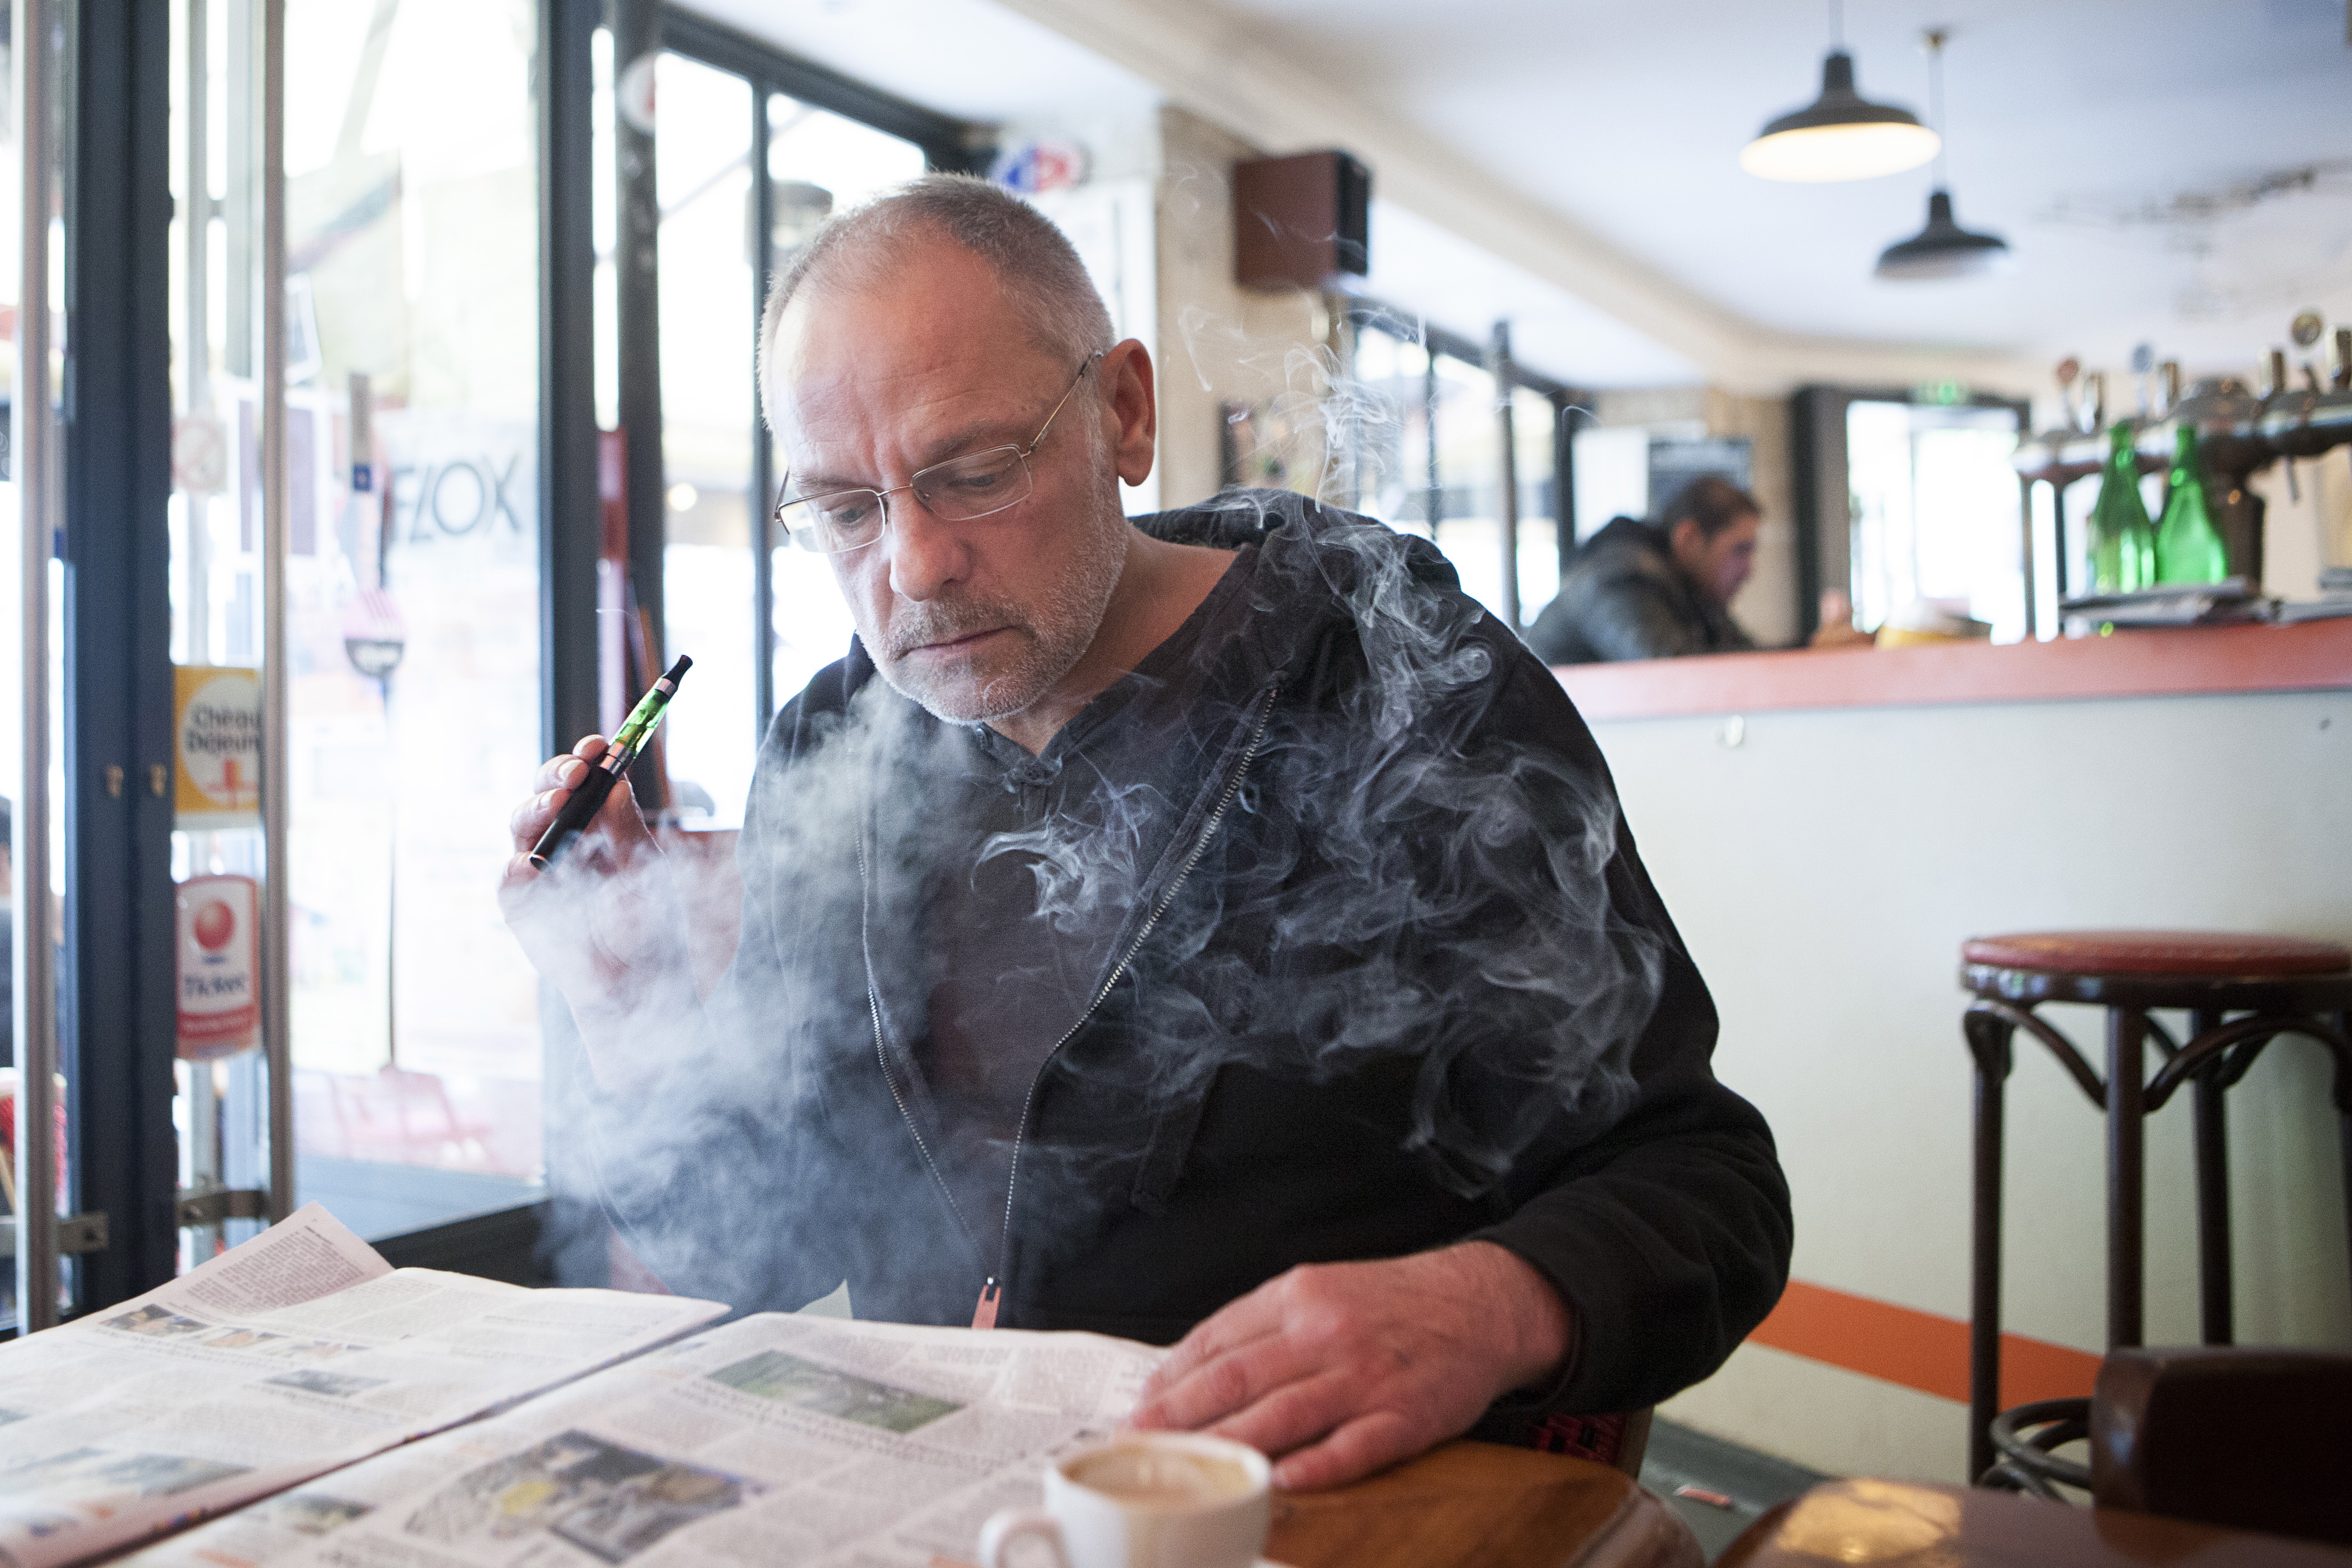 Man with an electronic cigarette in a public place.